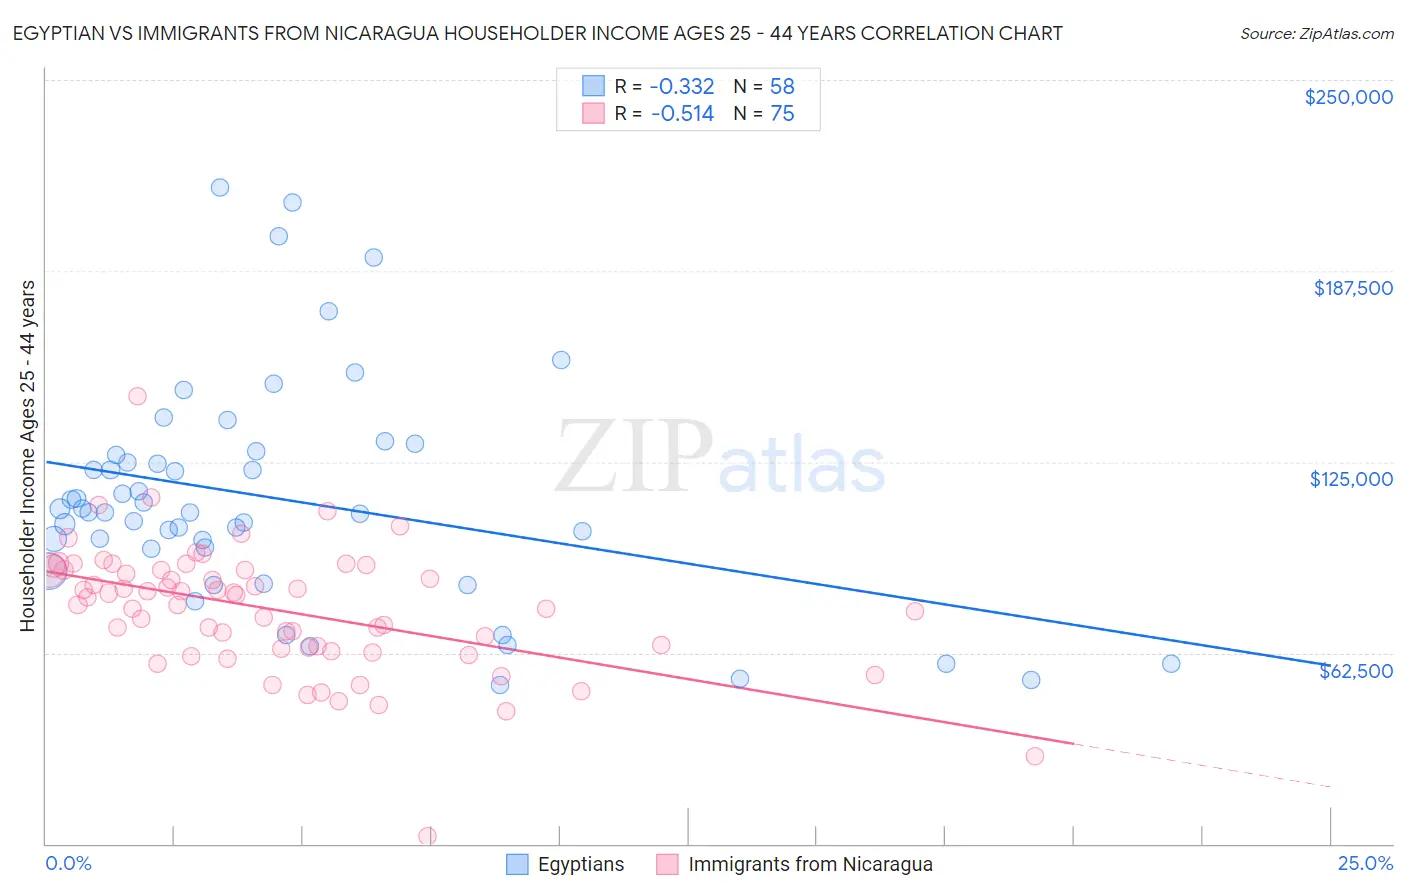 Egyptian vs Immigrants from Nicaragua Householder Income Ages 25 - 44 years